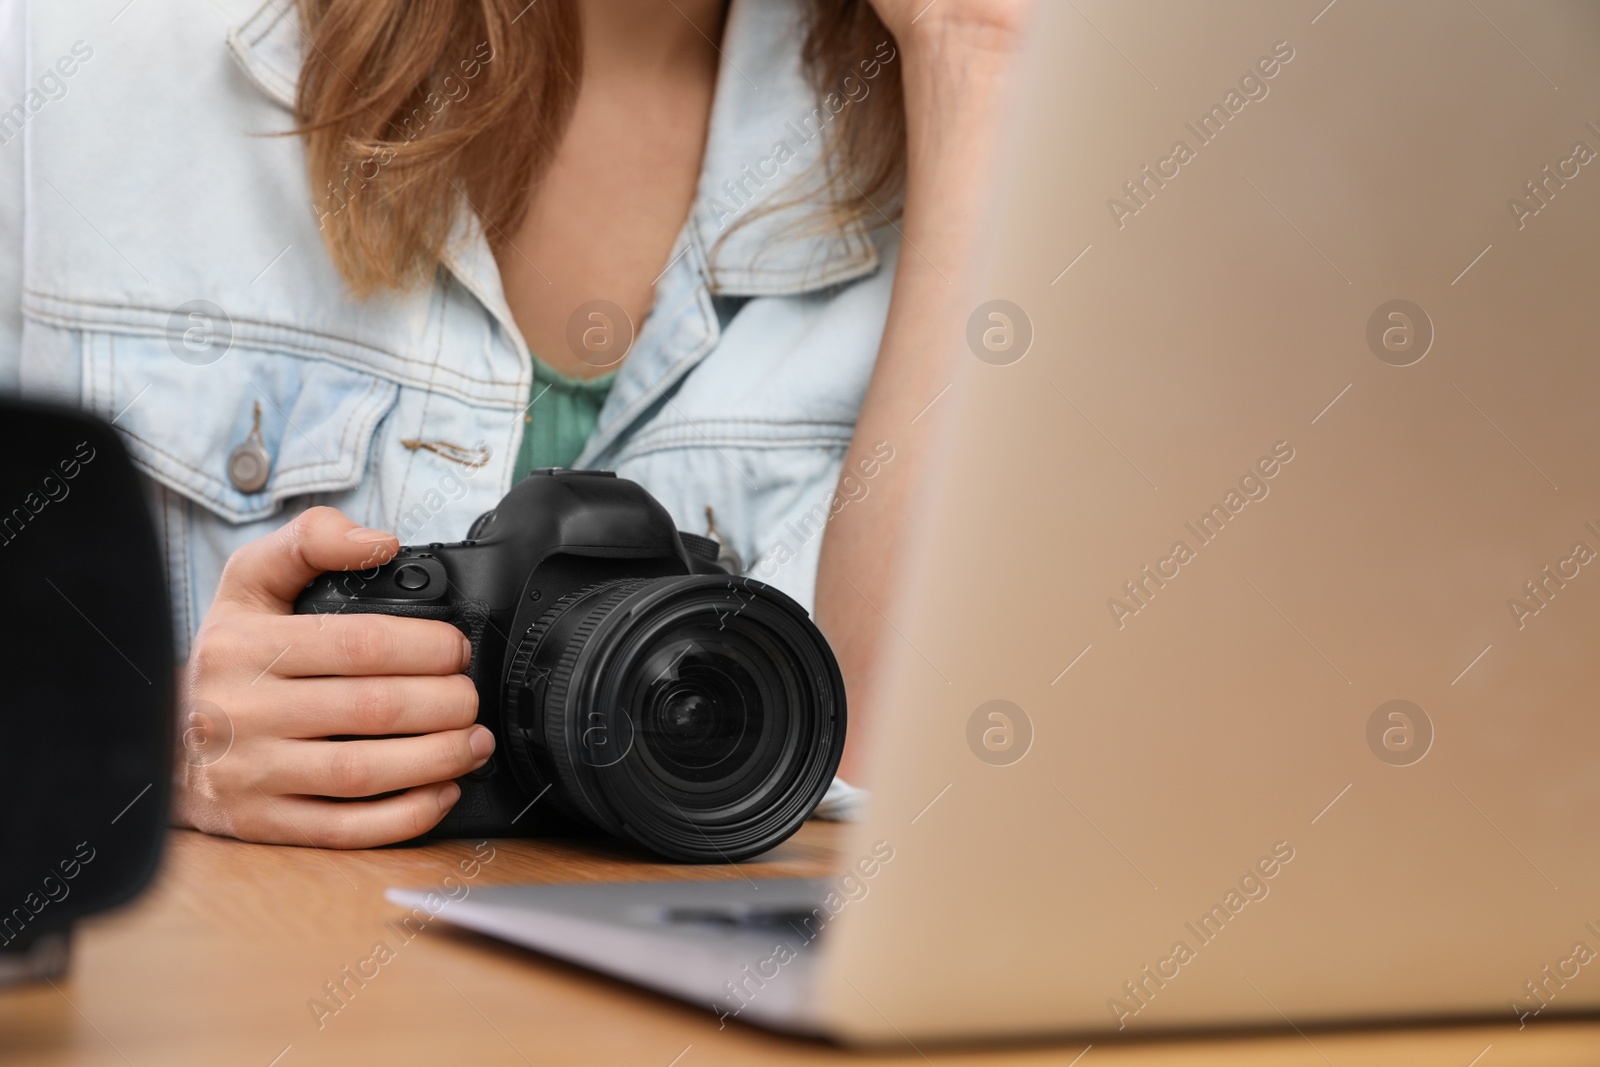 Photo of Professional photographer with camera working at table in office, closeup